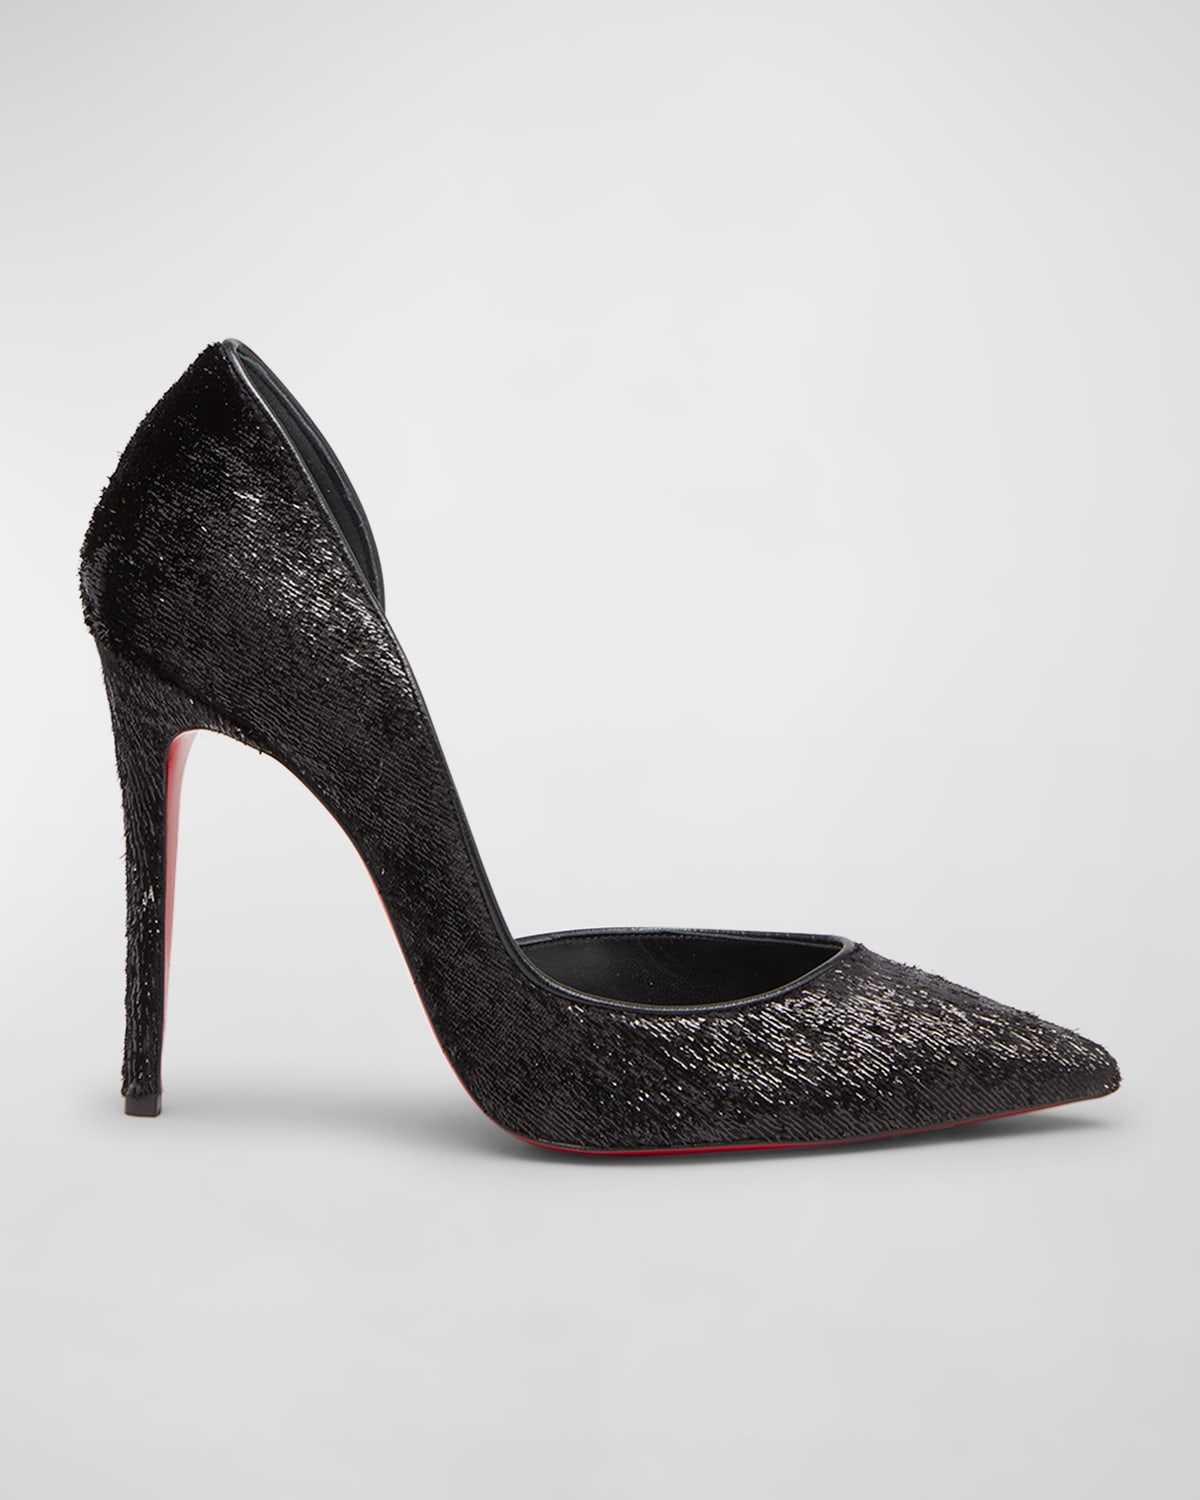 Christian Louboutin Iriza Half-d'Orsay Red Sole Pumps